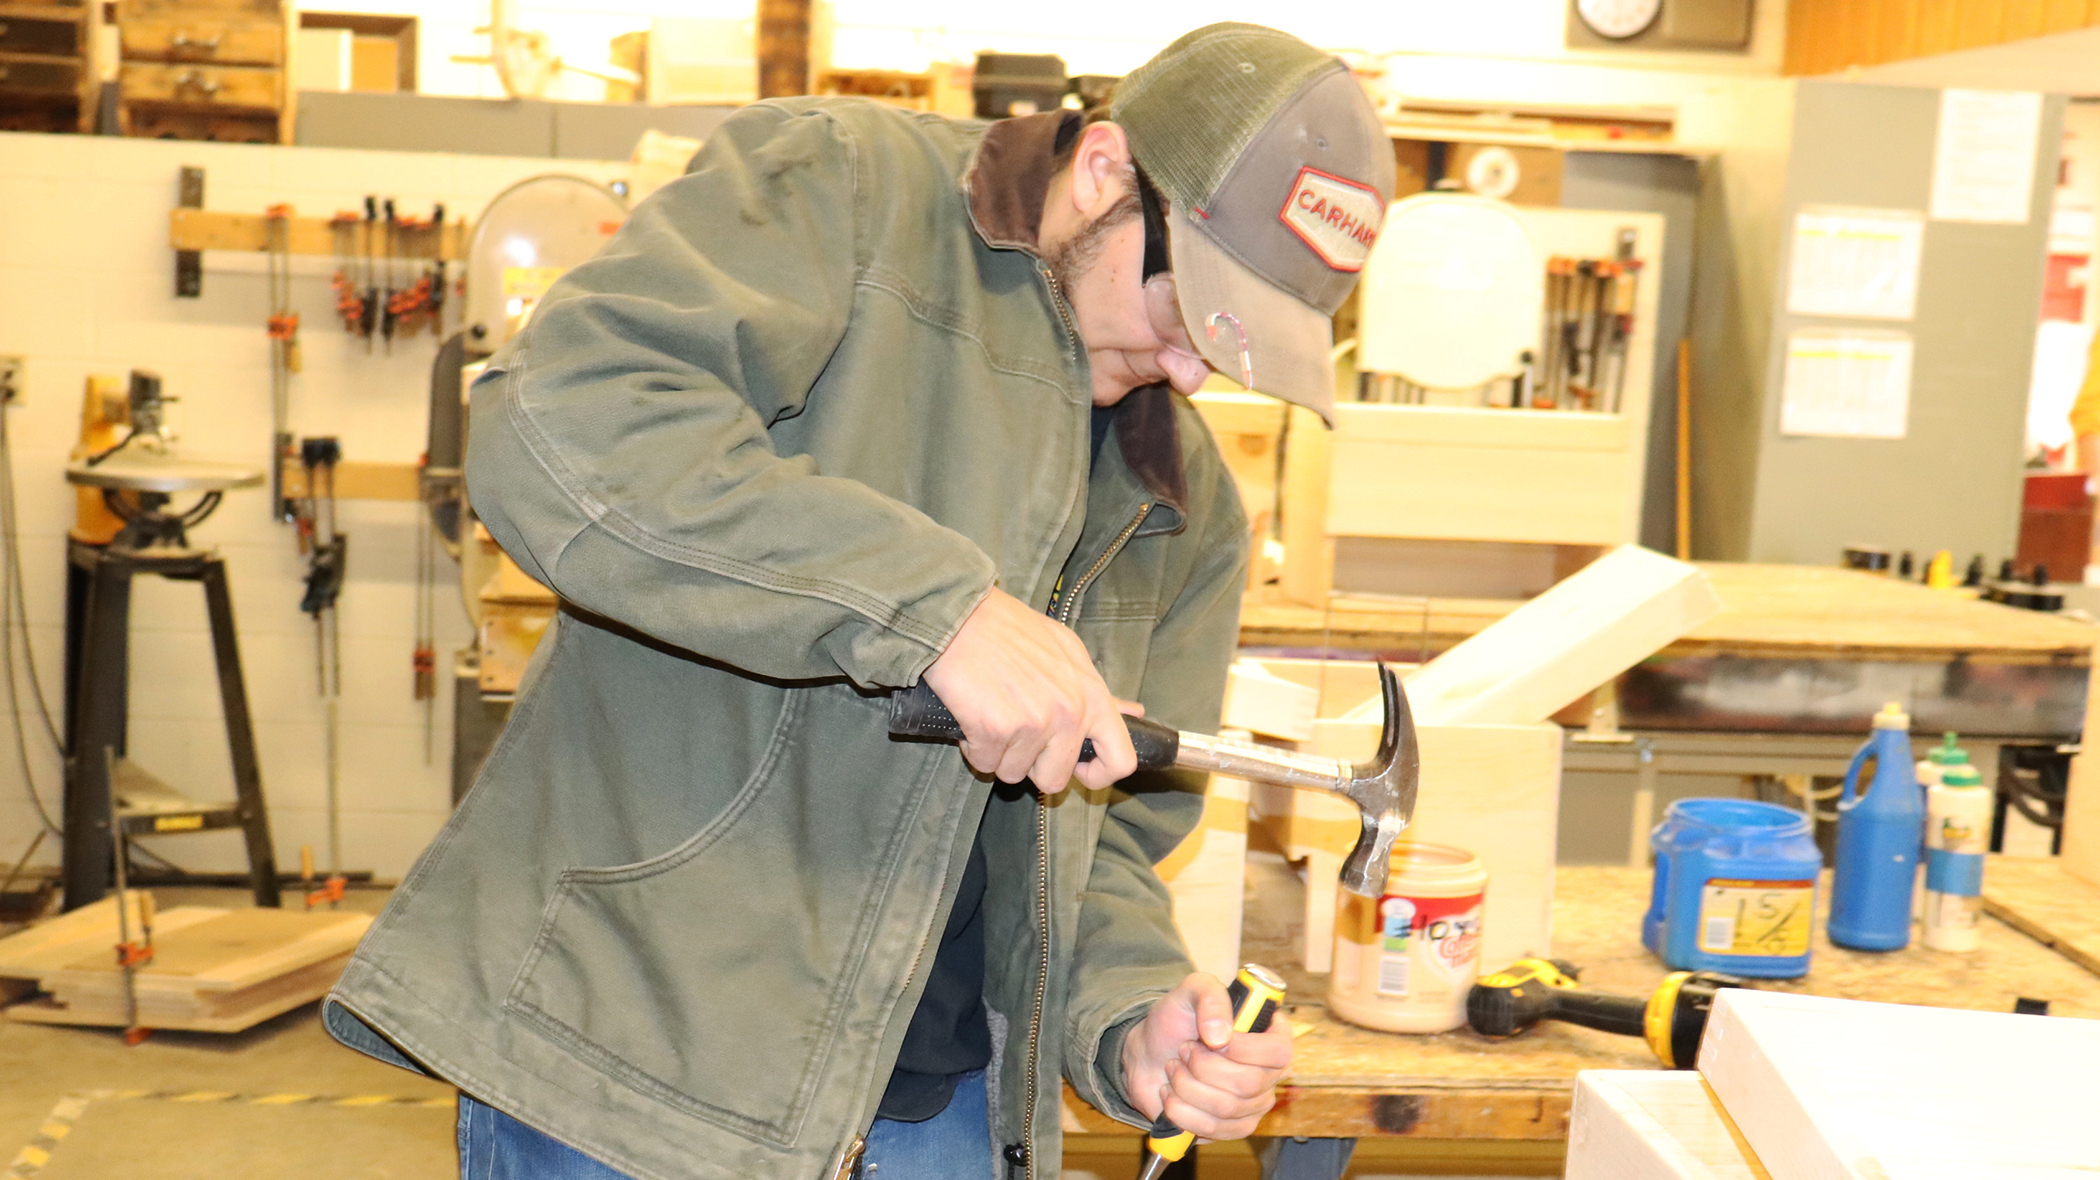 Dillon DiGirolamo, who is wearing a tan Carhartt ball cap and work jacket, blue jeans and protective eyewear, looks downward as using a hammer and chisel to work on a wooden board in a Capital Region BOCES Construction classroom.